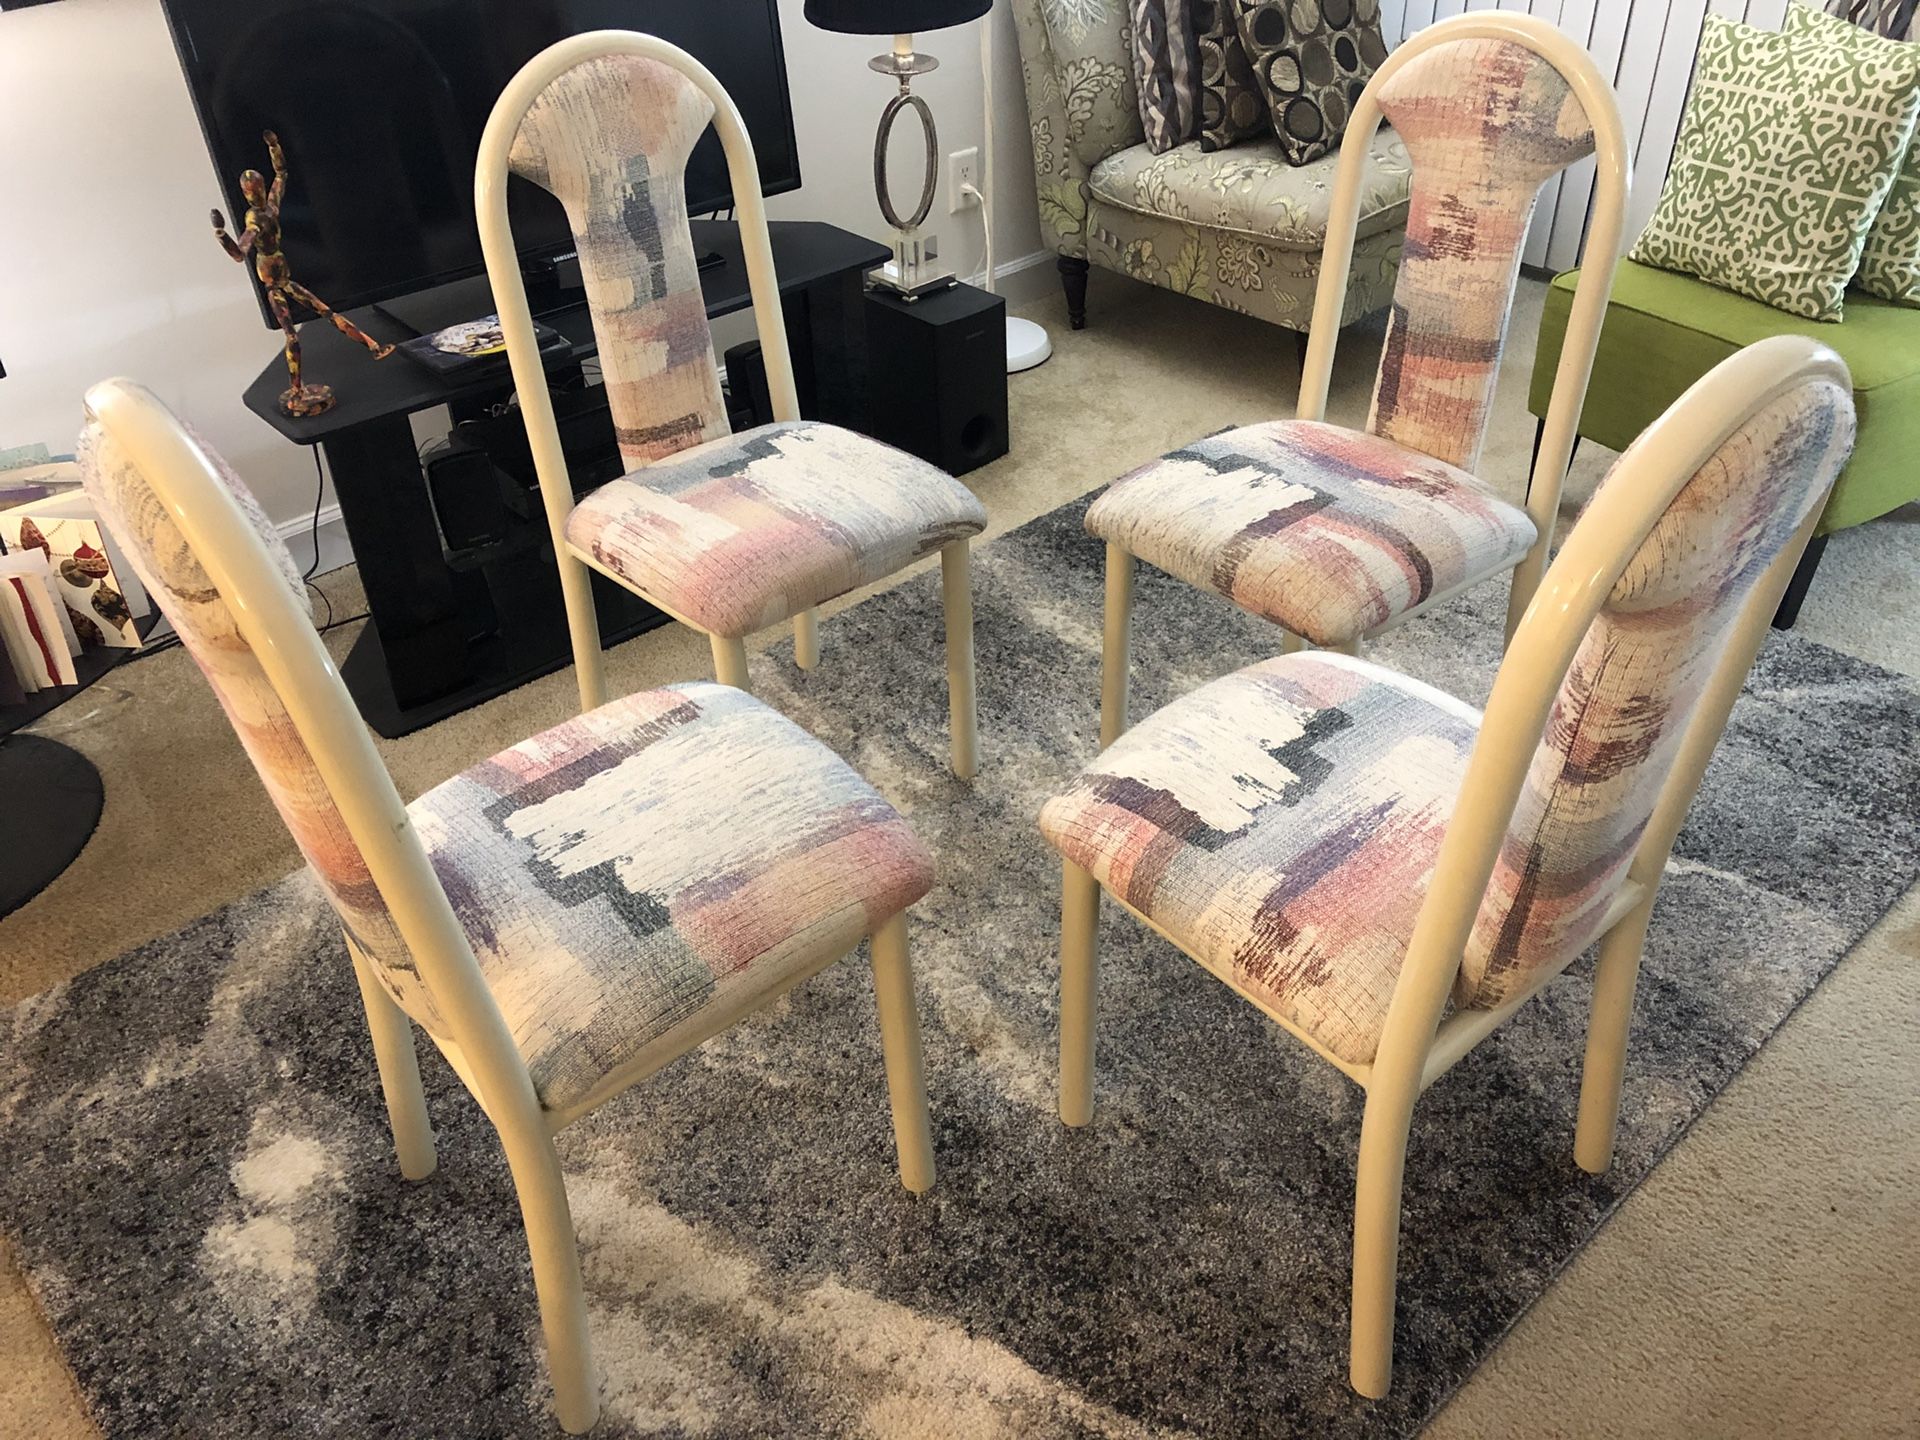 4 dinning table chairs